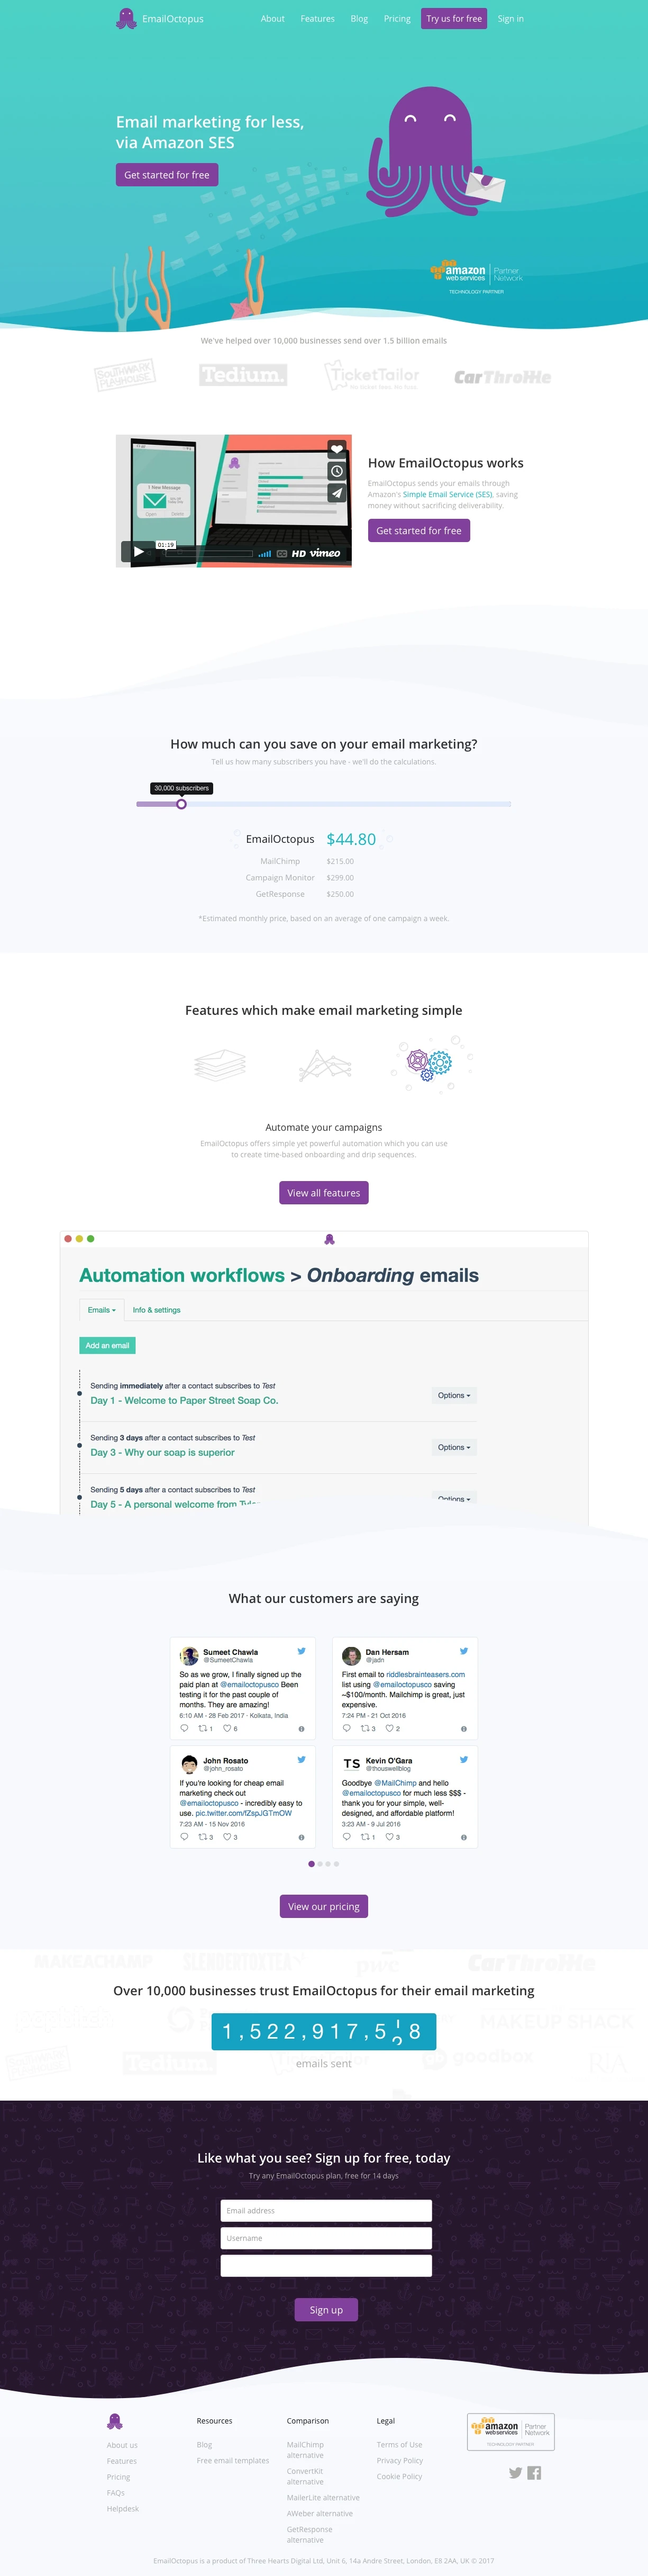 Email Octopus Landing Page Example: Manage and email your subscribers for far cheaper by connecting your Amazon SES account. Powerful analytics, bounce/complaint tracking and more.